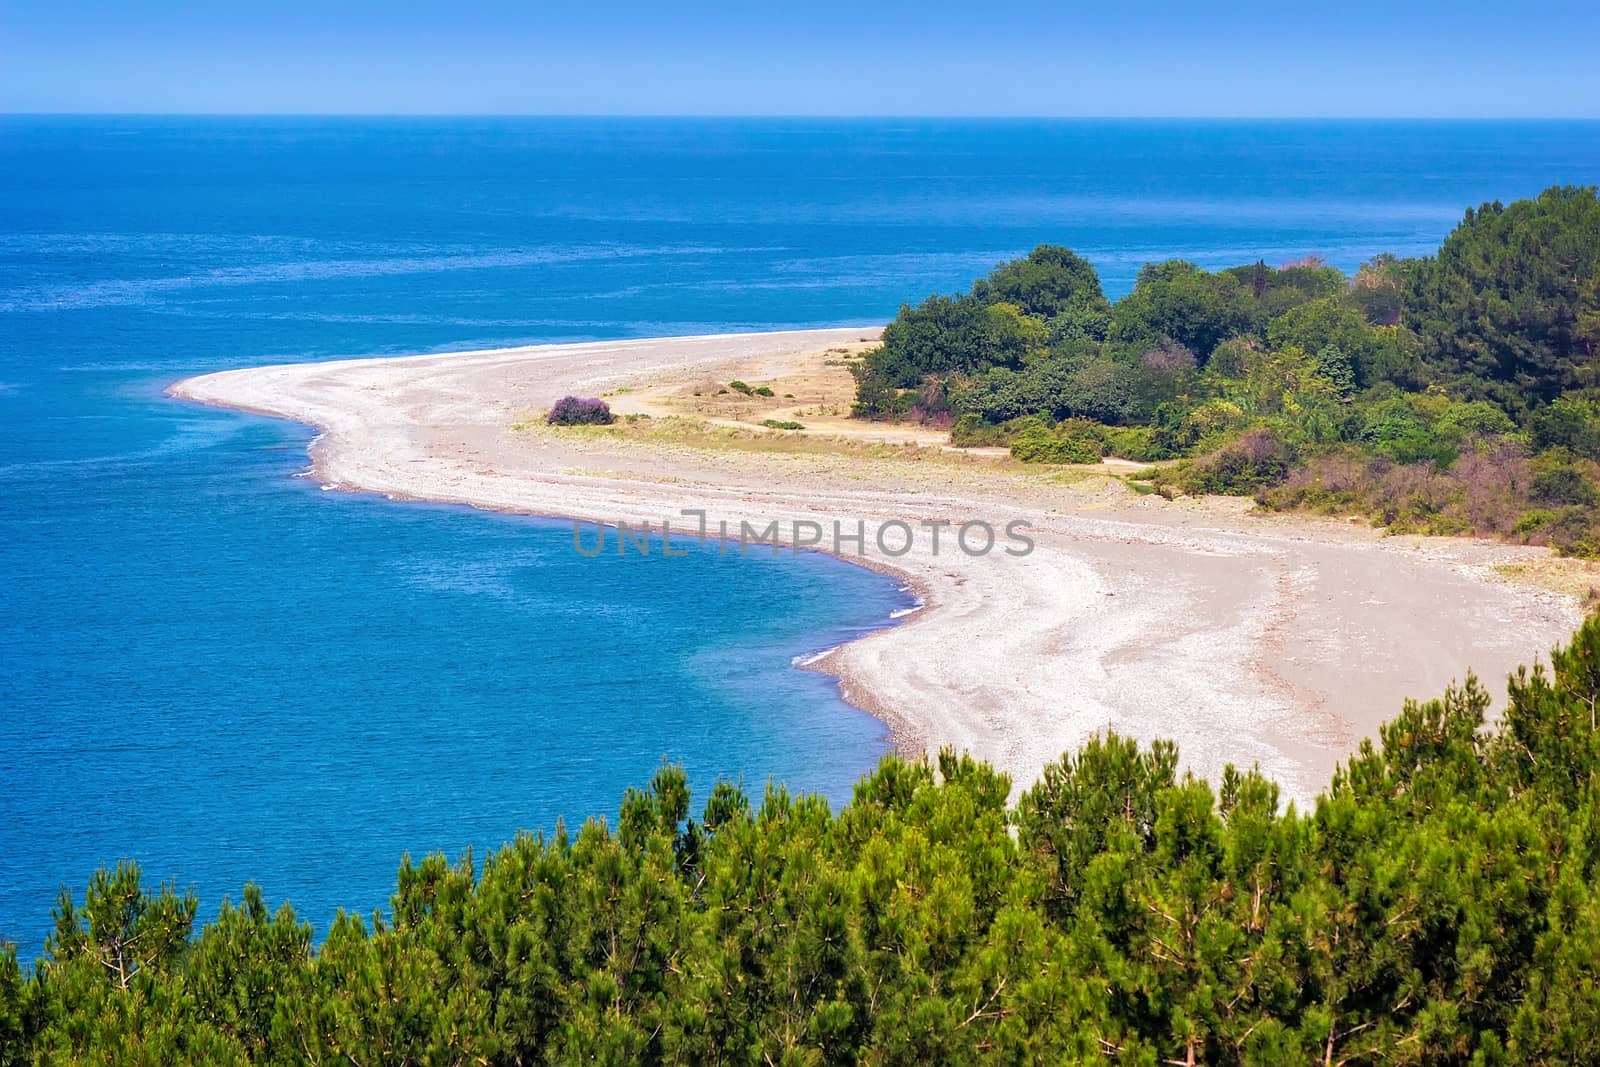 Beautiful landscape: blue sea, beach, shore with growing pine trees. The view from the top.